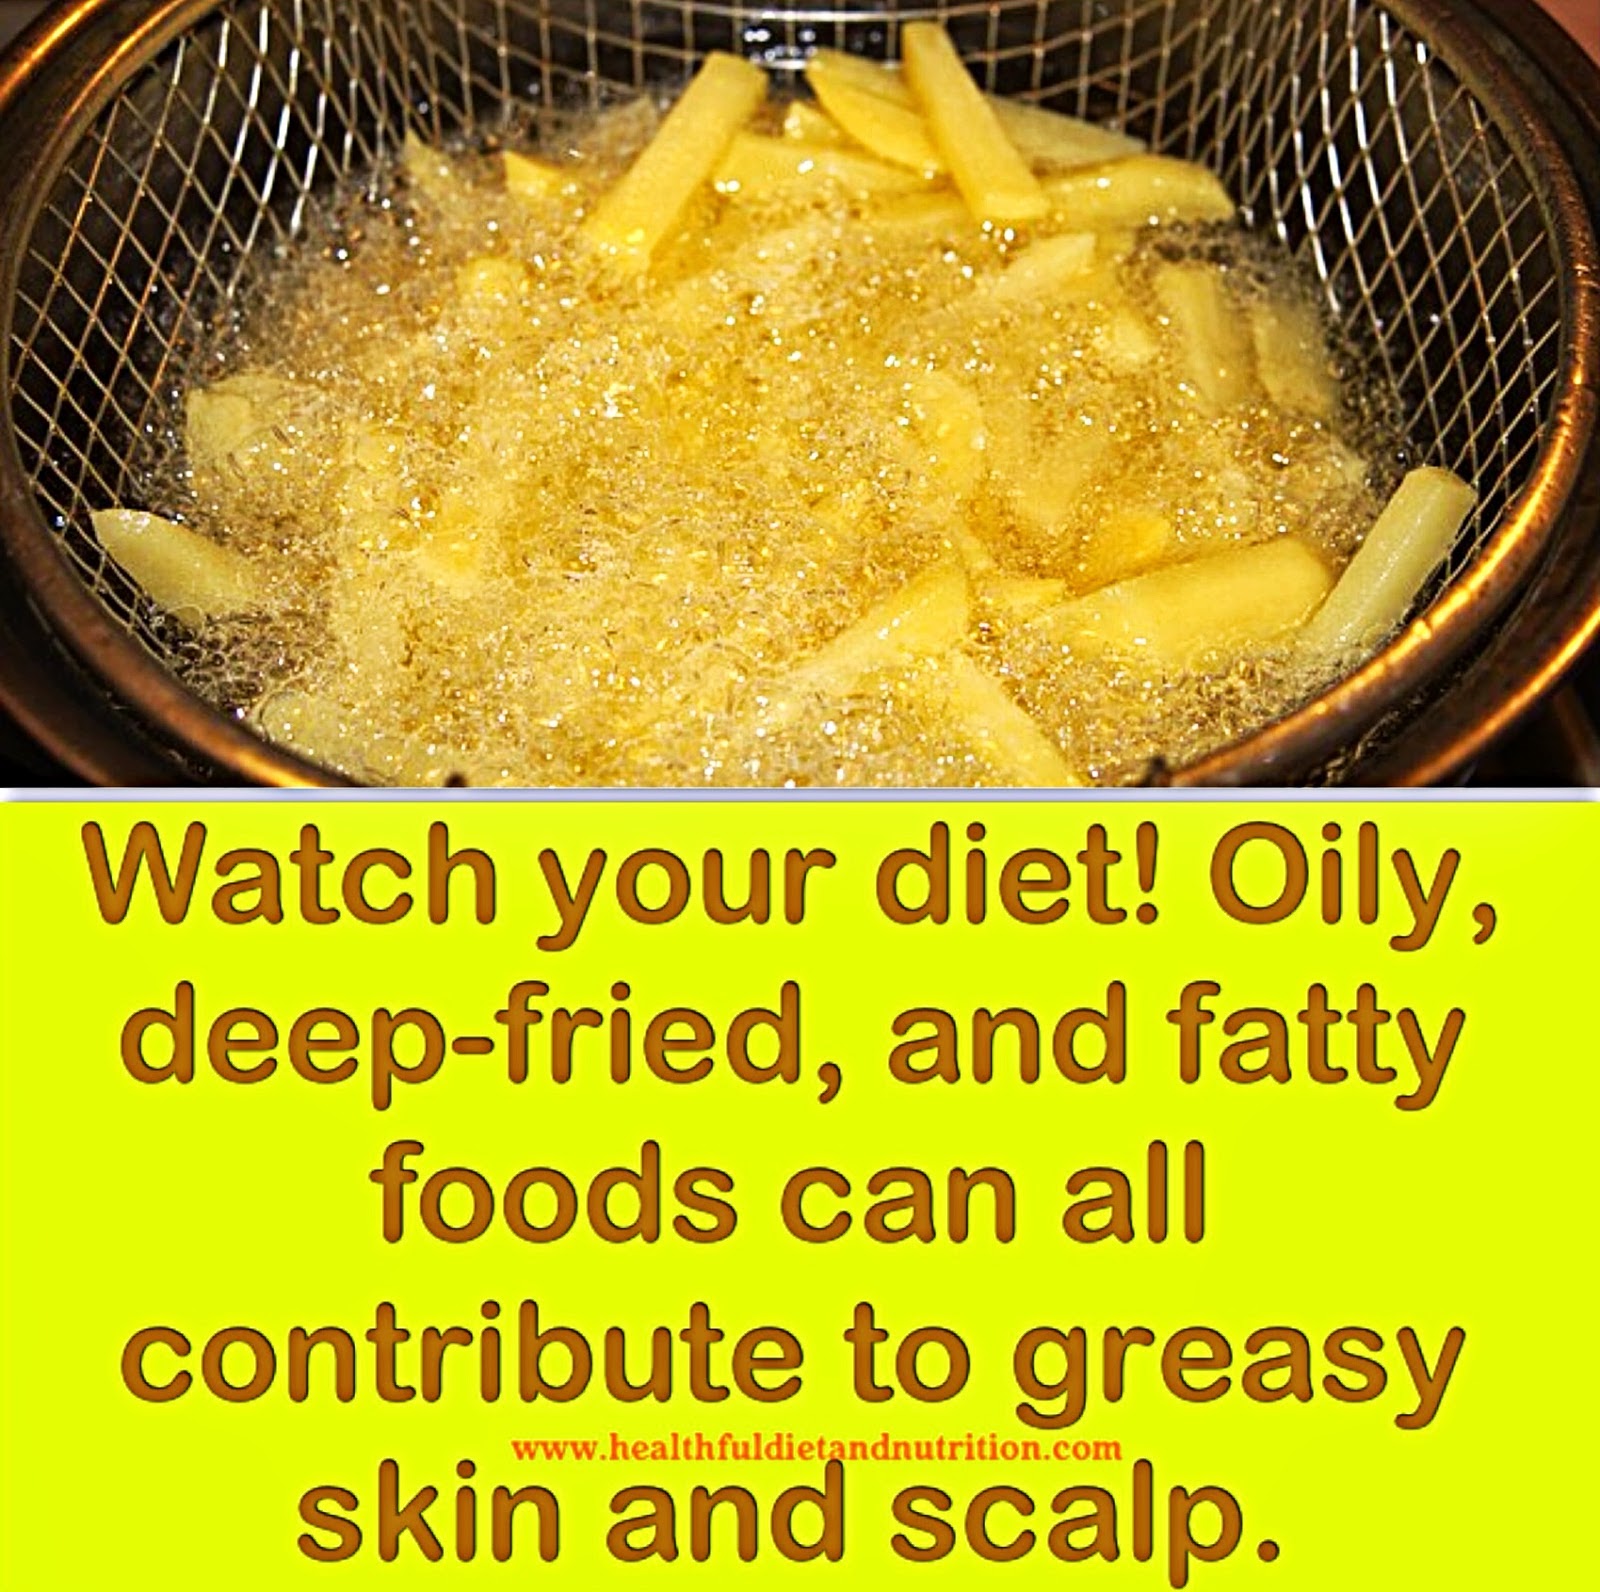 Watch Your Diet To Prevent Greasy SKin And Scalp